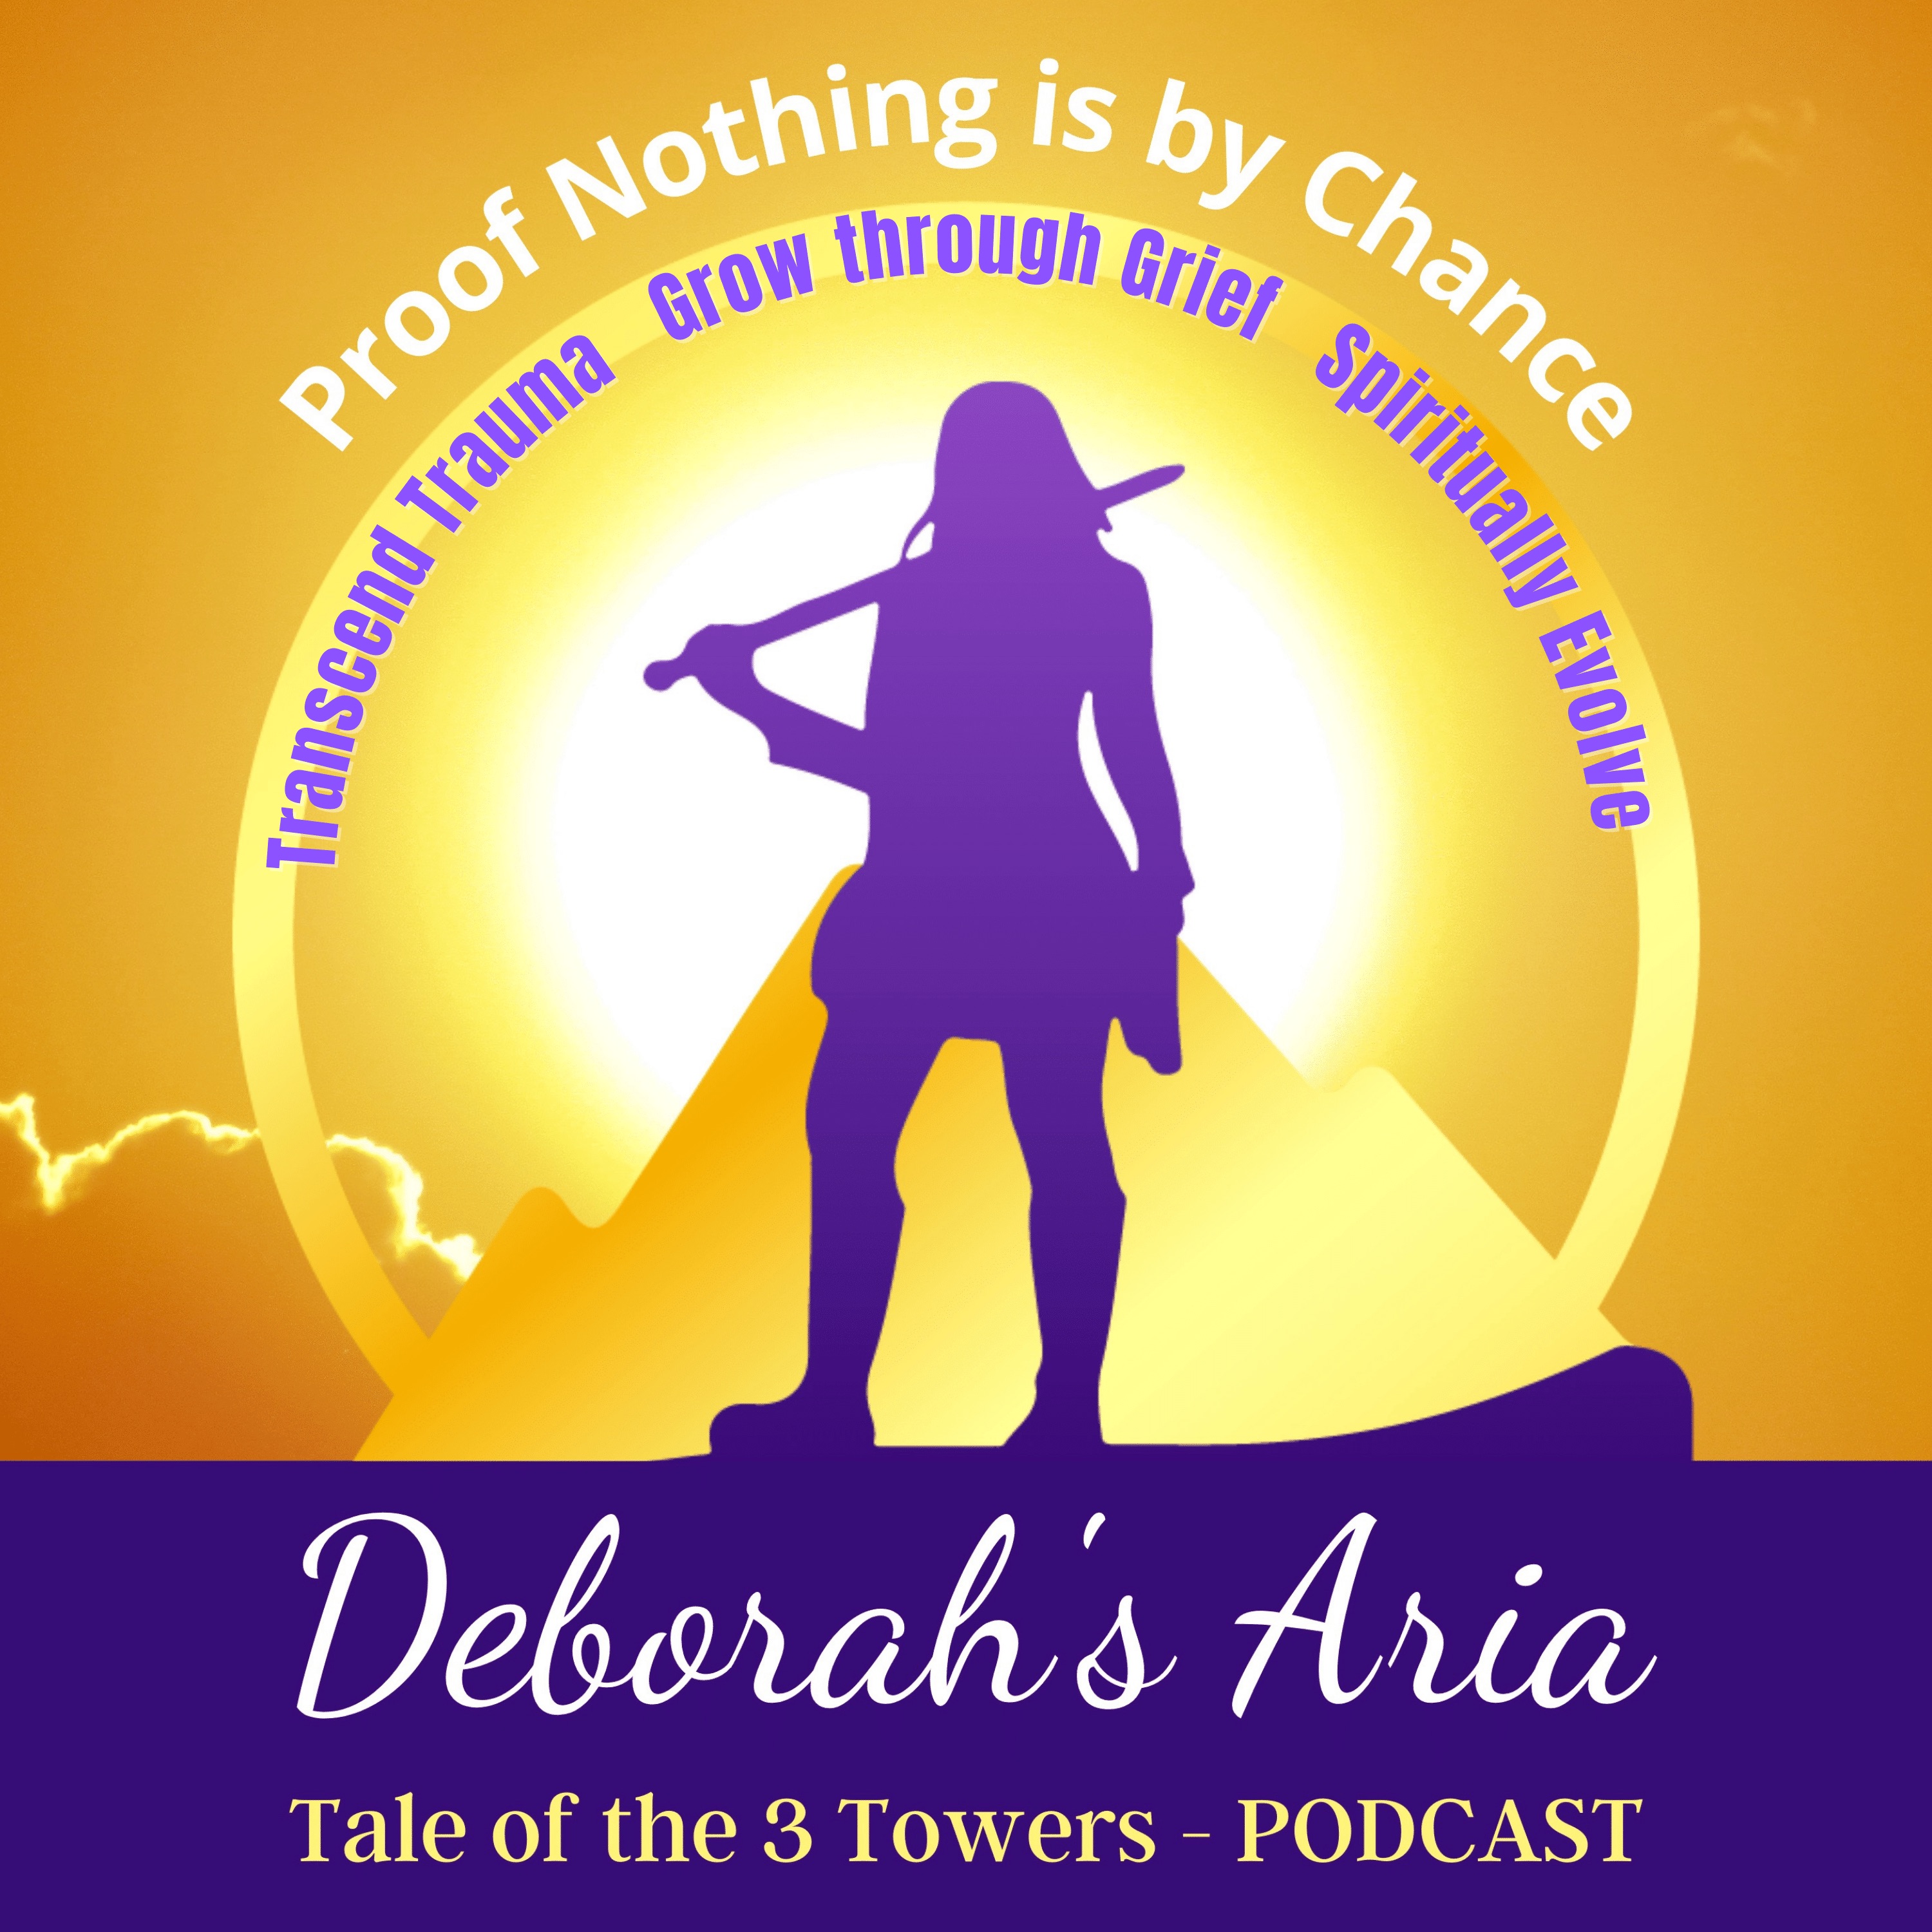 Show artwork for Deborah's Aria, Tale of the 3 Towers